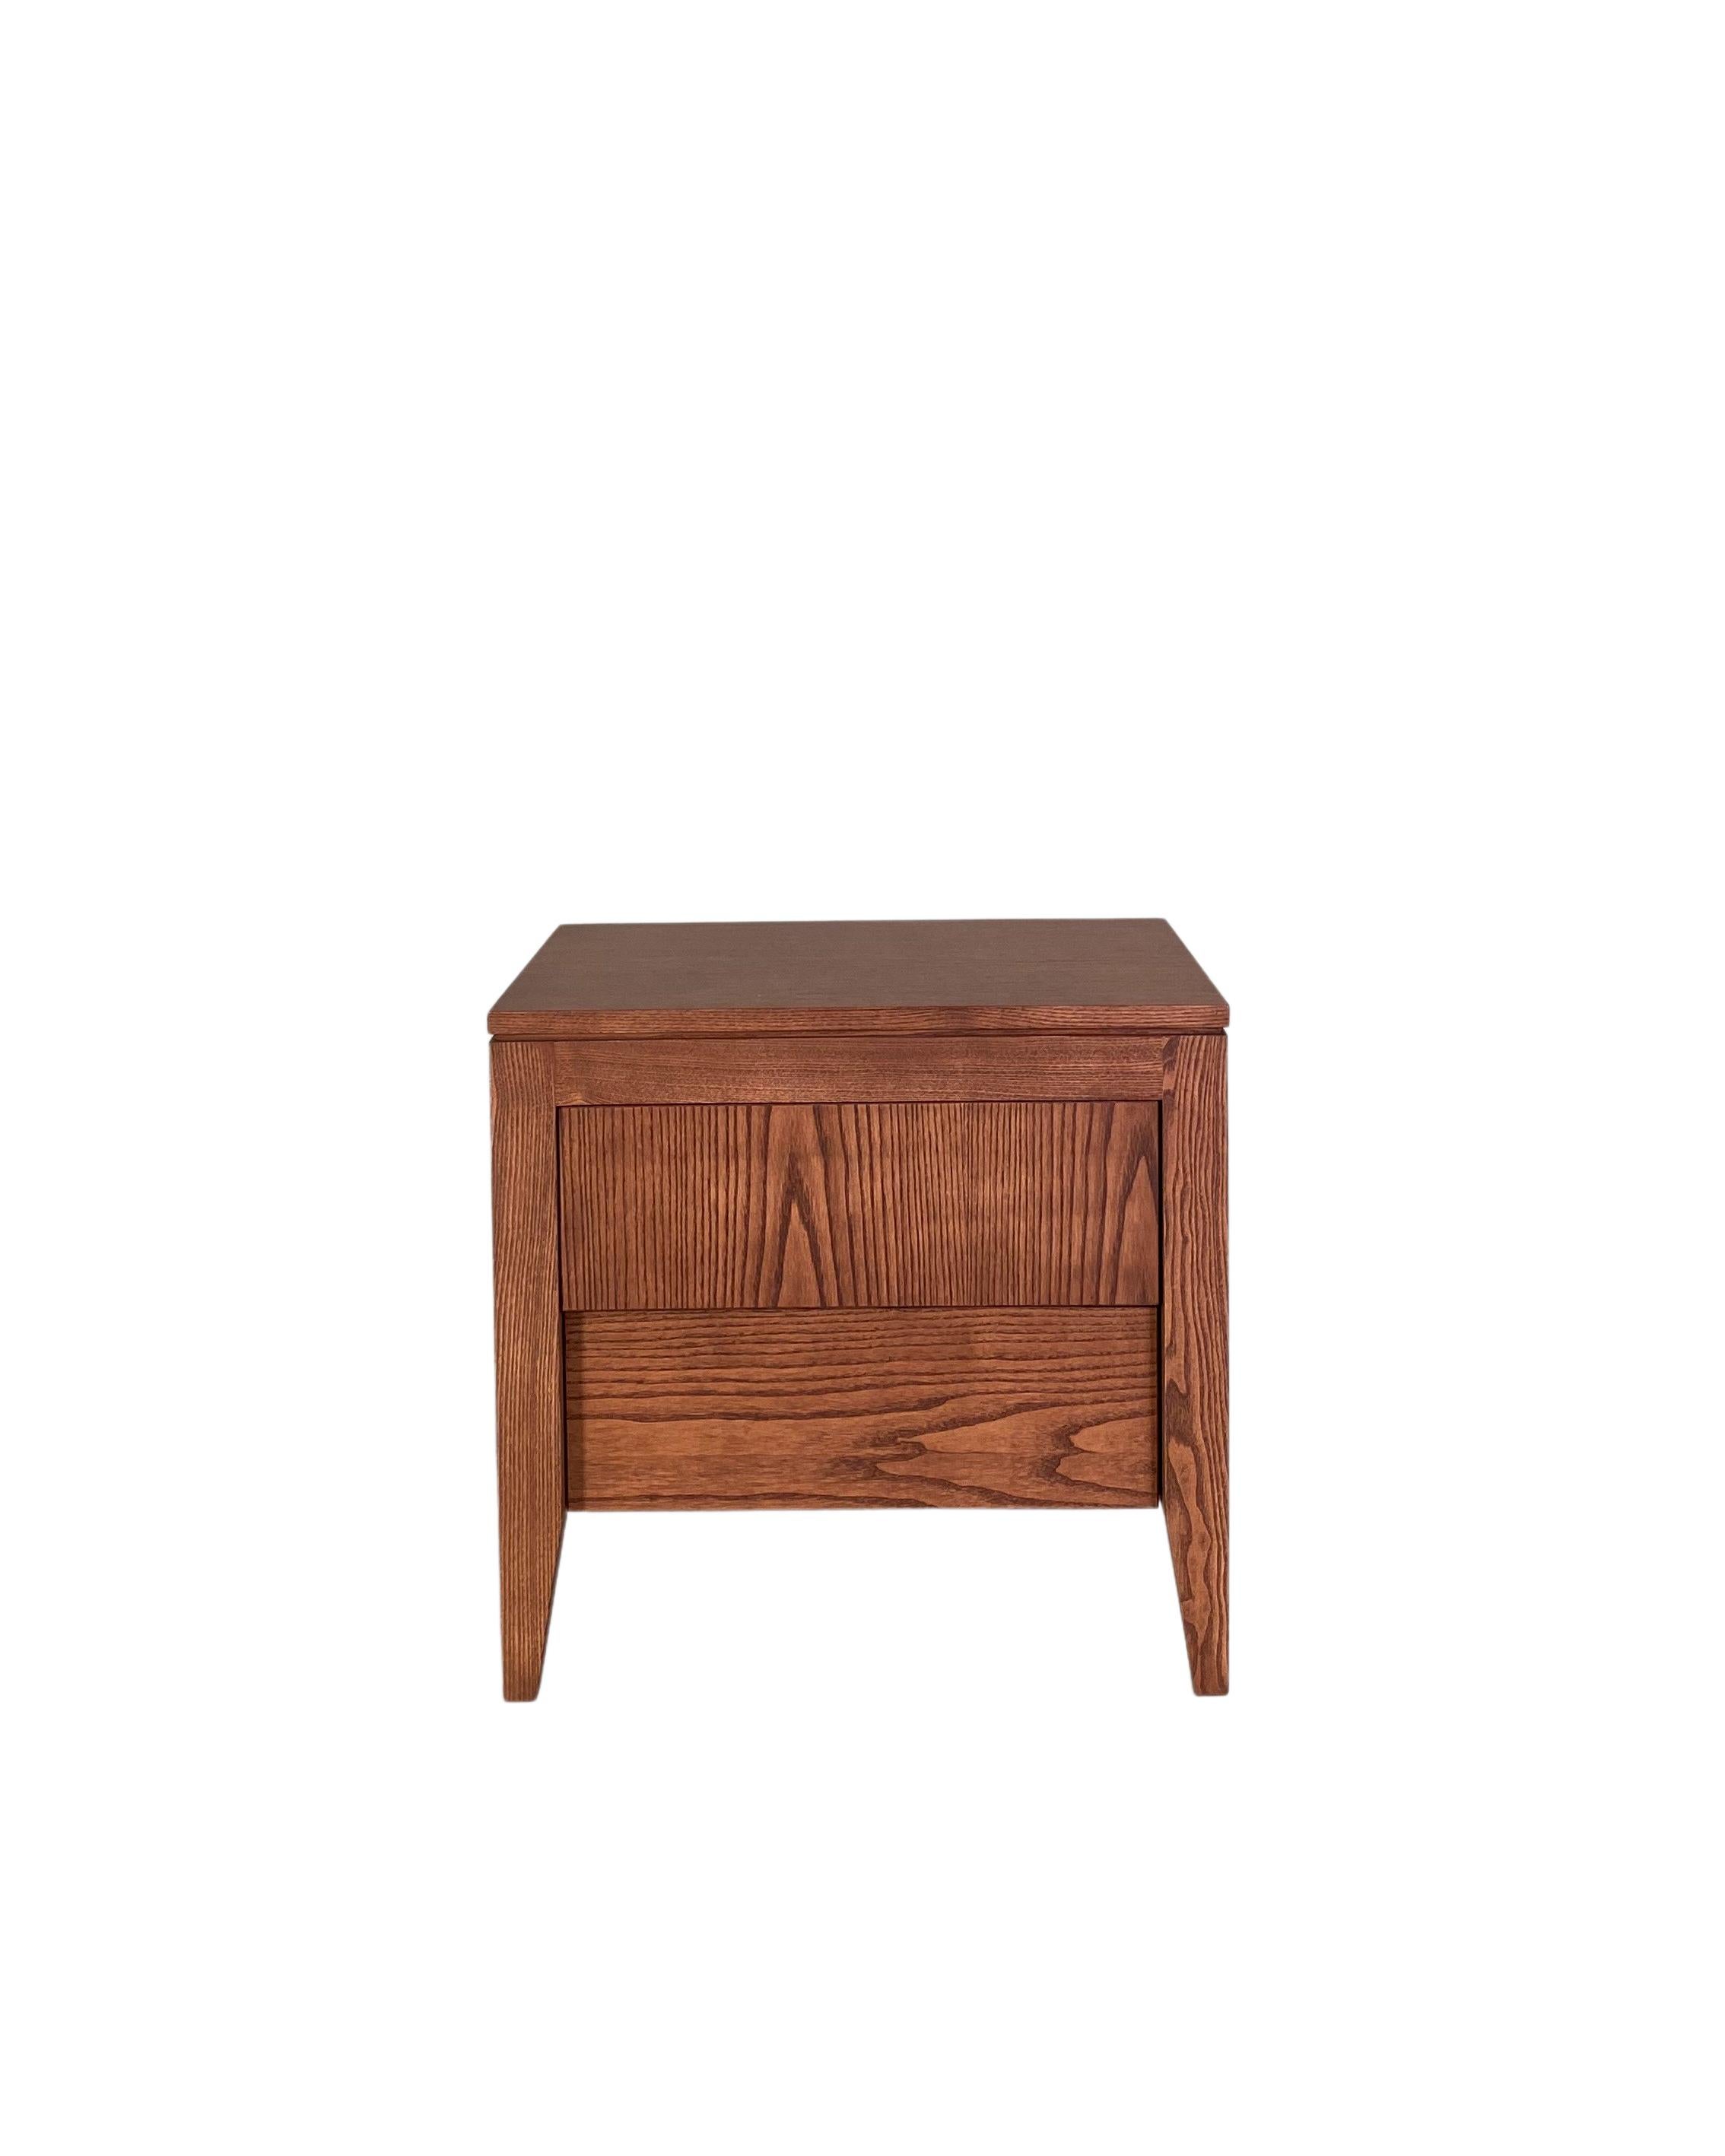 Contemporary Anerio Bedside Table, Made of Canaletto Walnut Wood For Sale